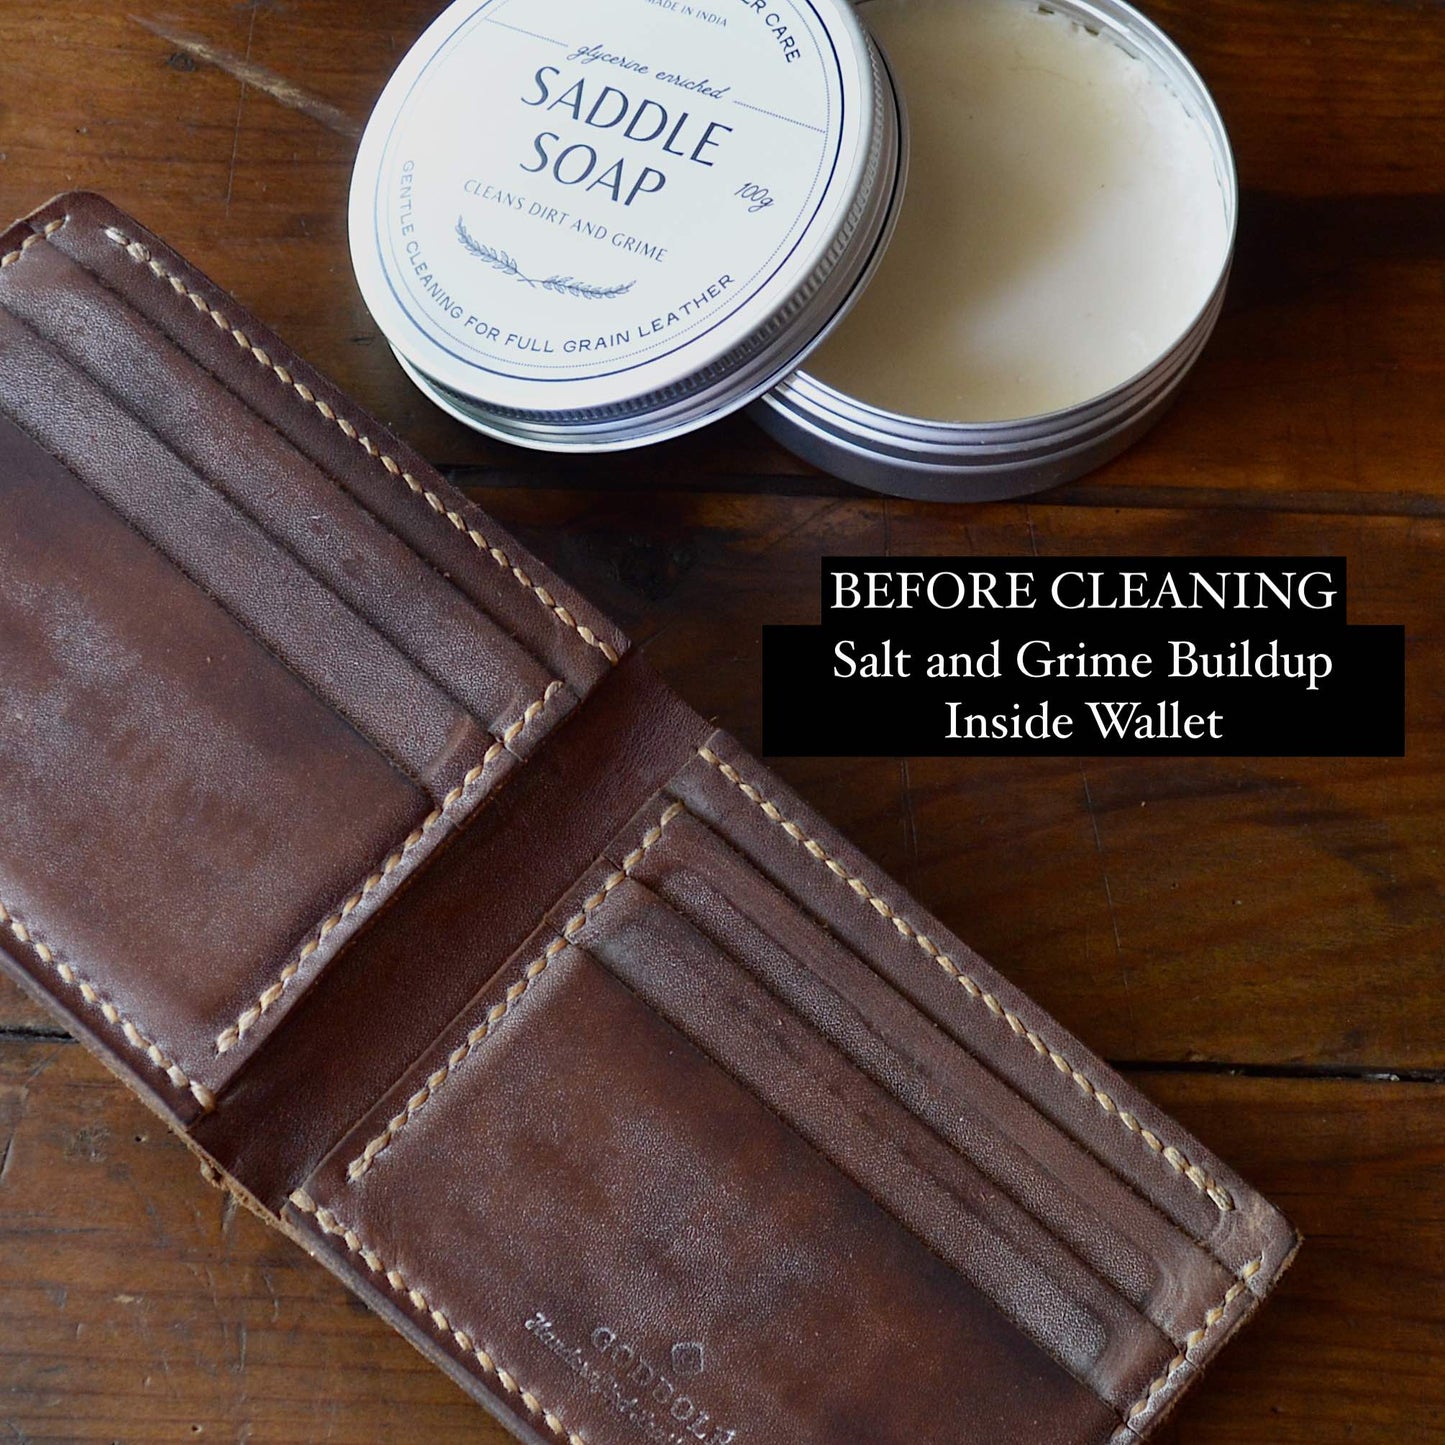 All-Natural Leather Balm